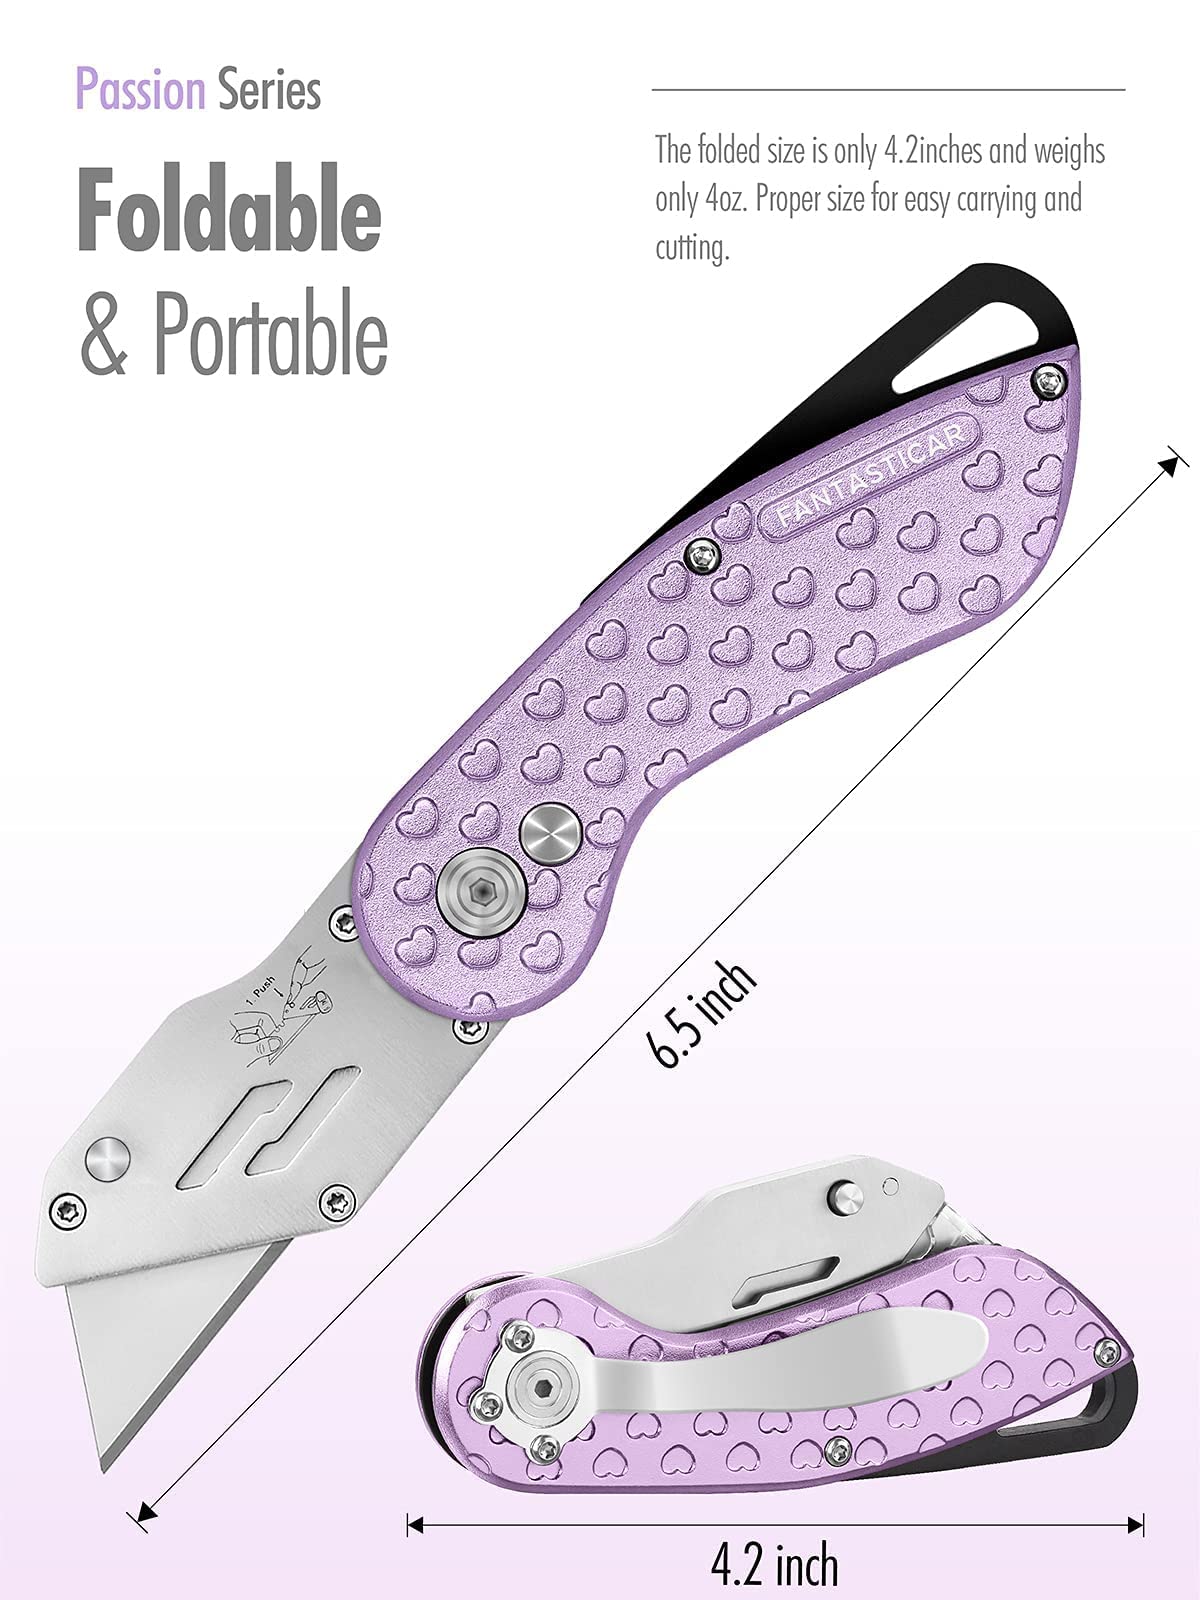 FantastiCAR Fancy Folding Utility Knife Box Cutter Set with Extra Blades (Pink and Purple)